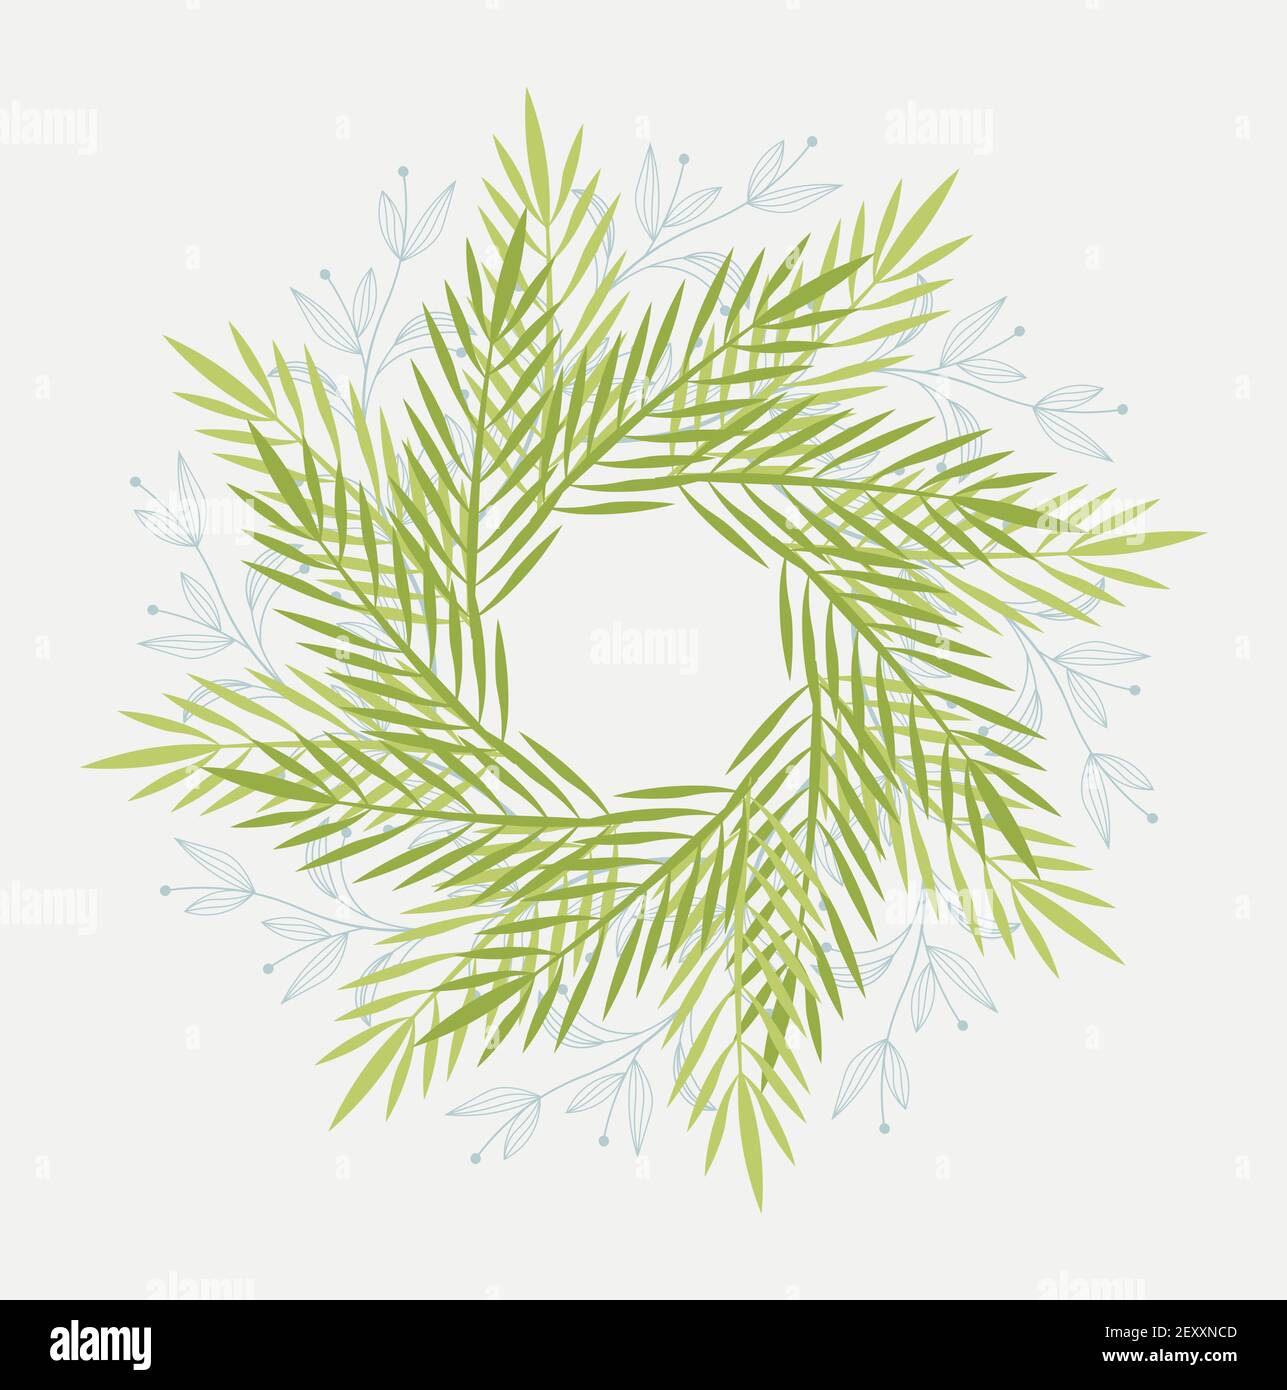 Radial fern vector pattern on a light background Stock Vector